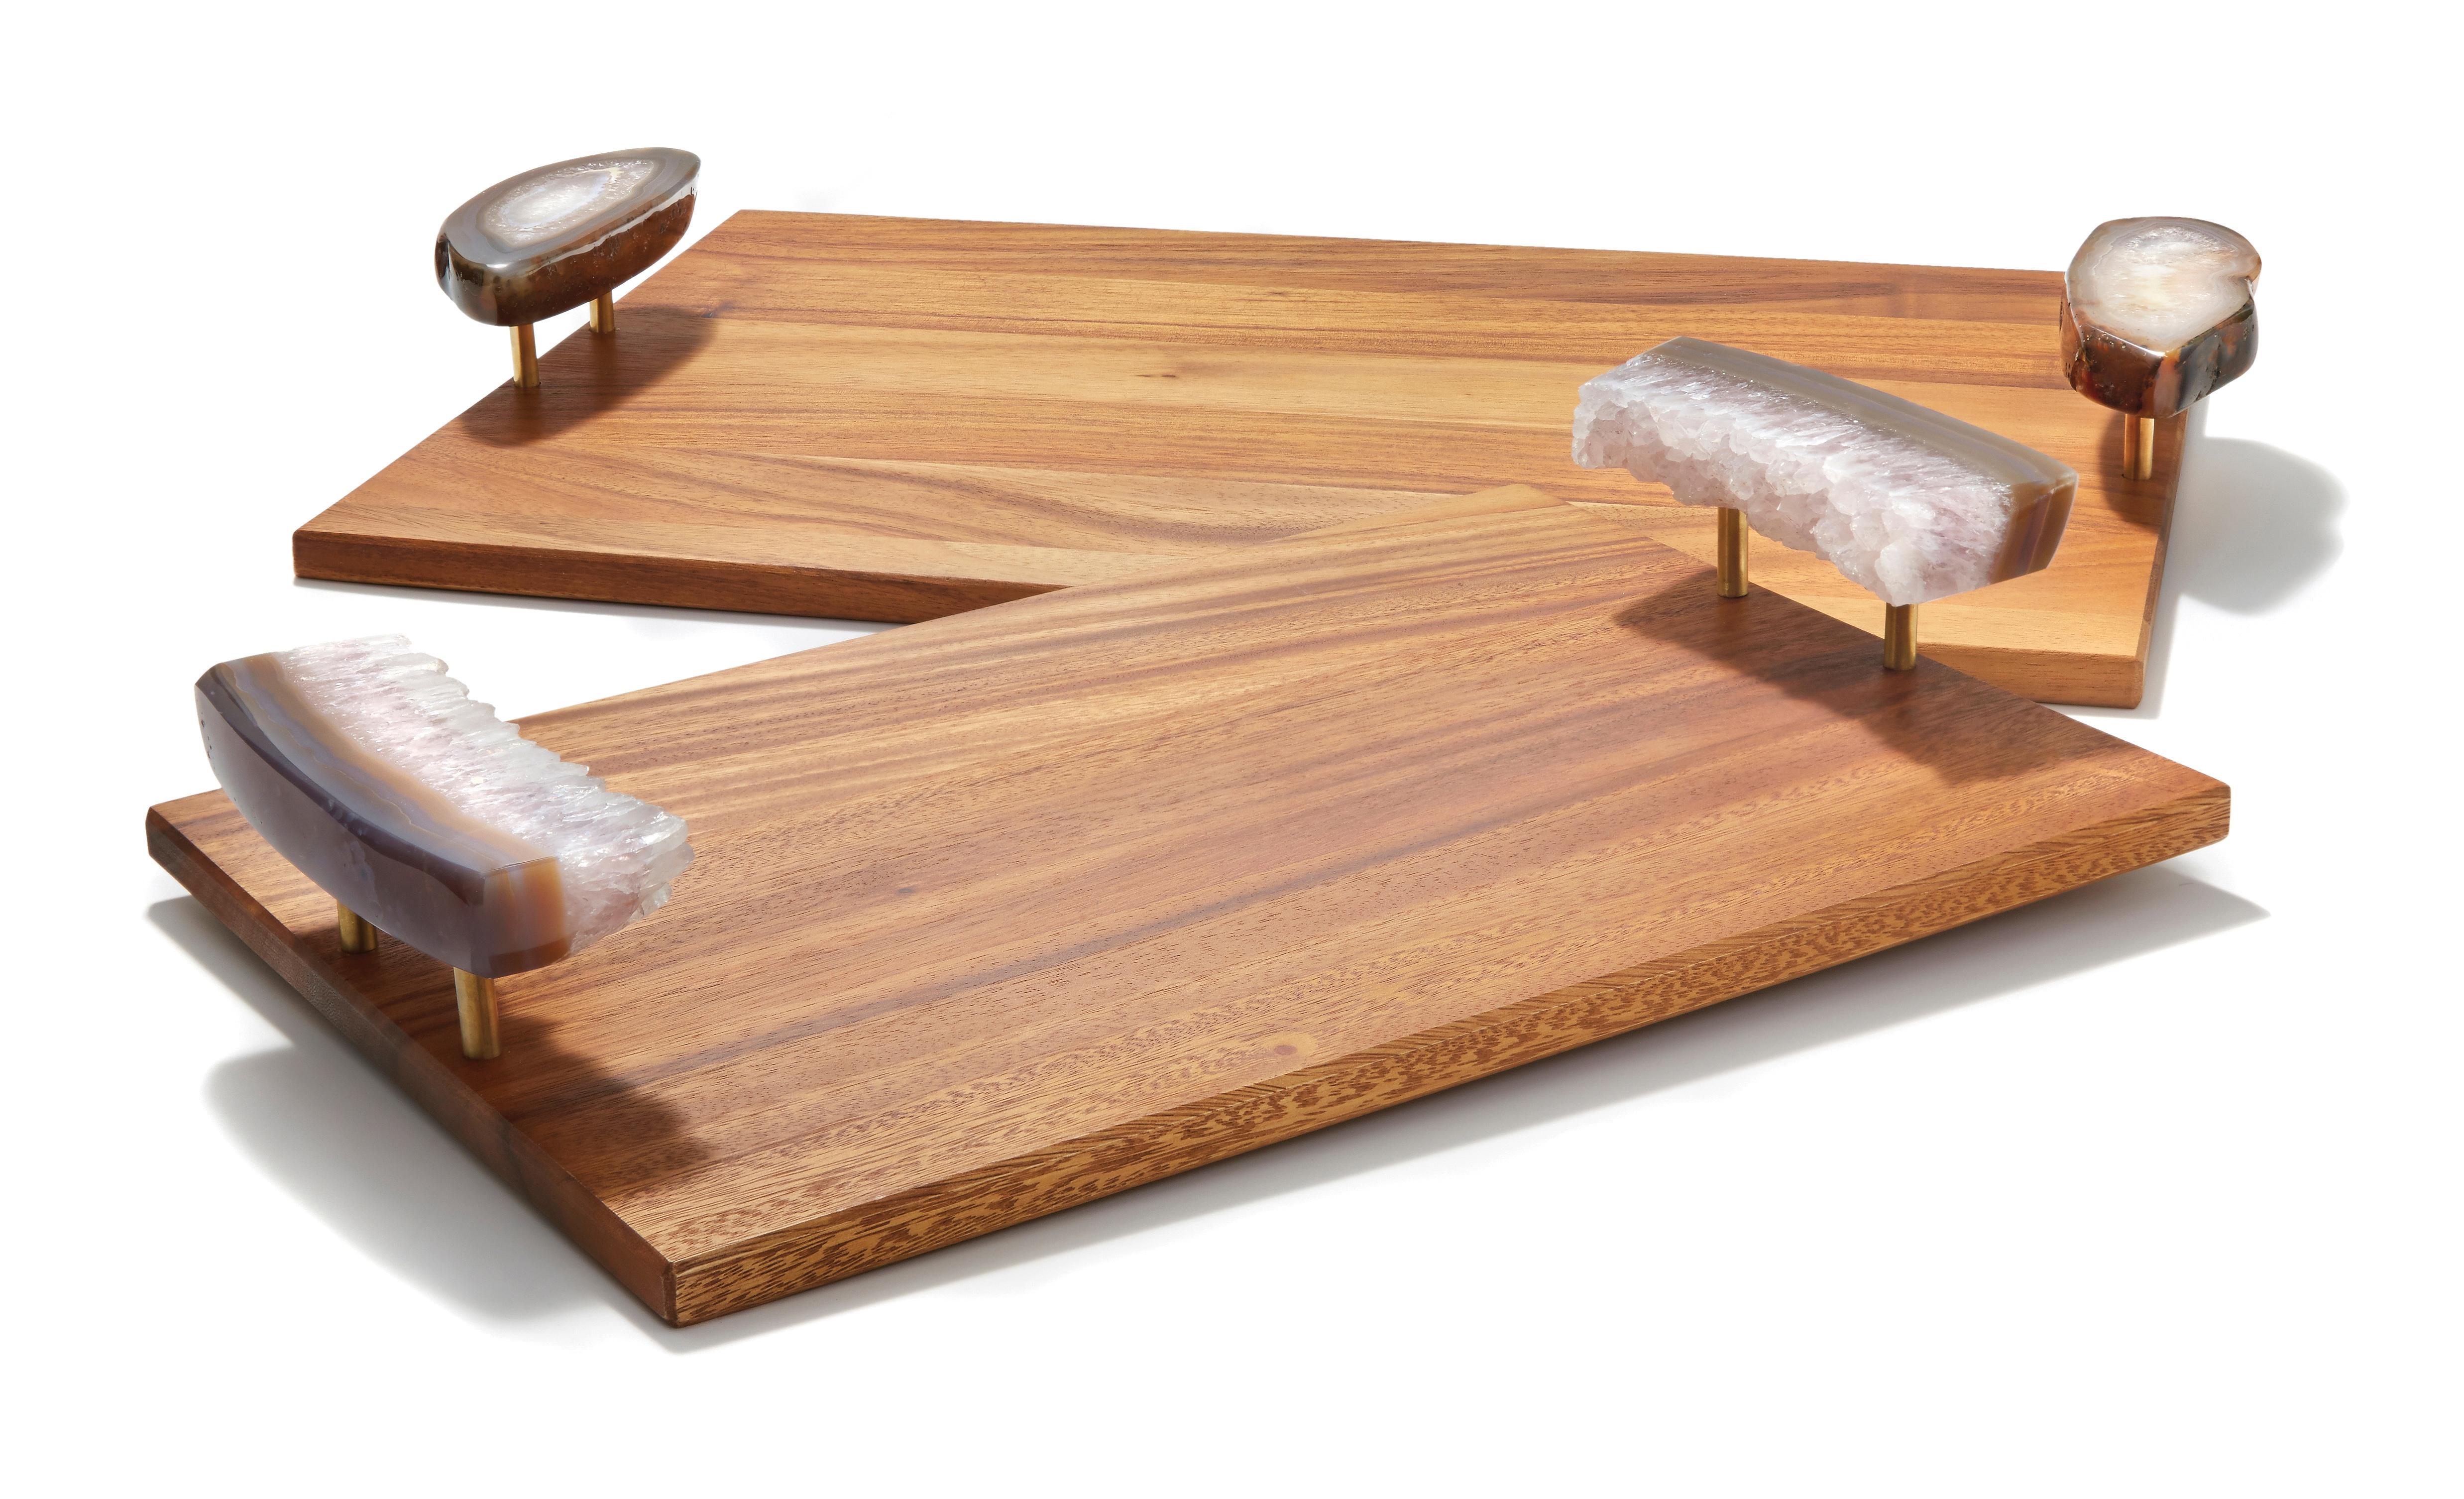 Pairing solid acacia wood with brass and natural stone (rare druze and polished agate), these trays (named after the Portuguese word for wood) are authentic and substantial. Like many of the signature designs from Anna, the natural edges of the